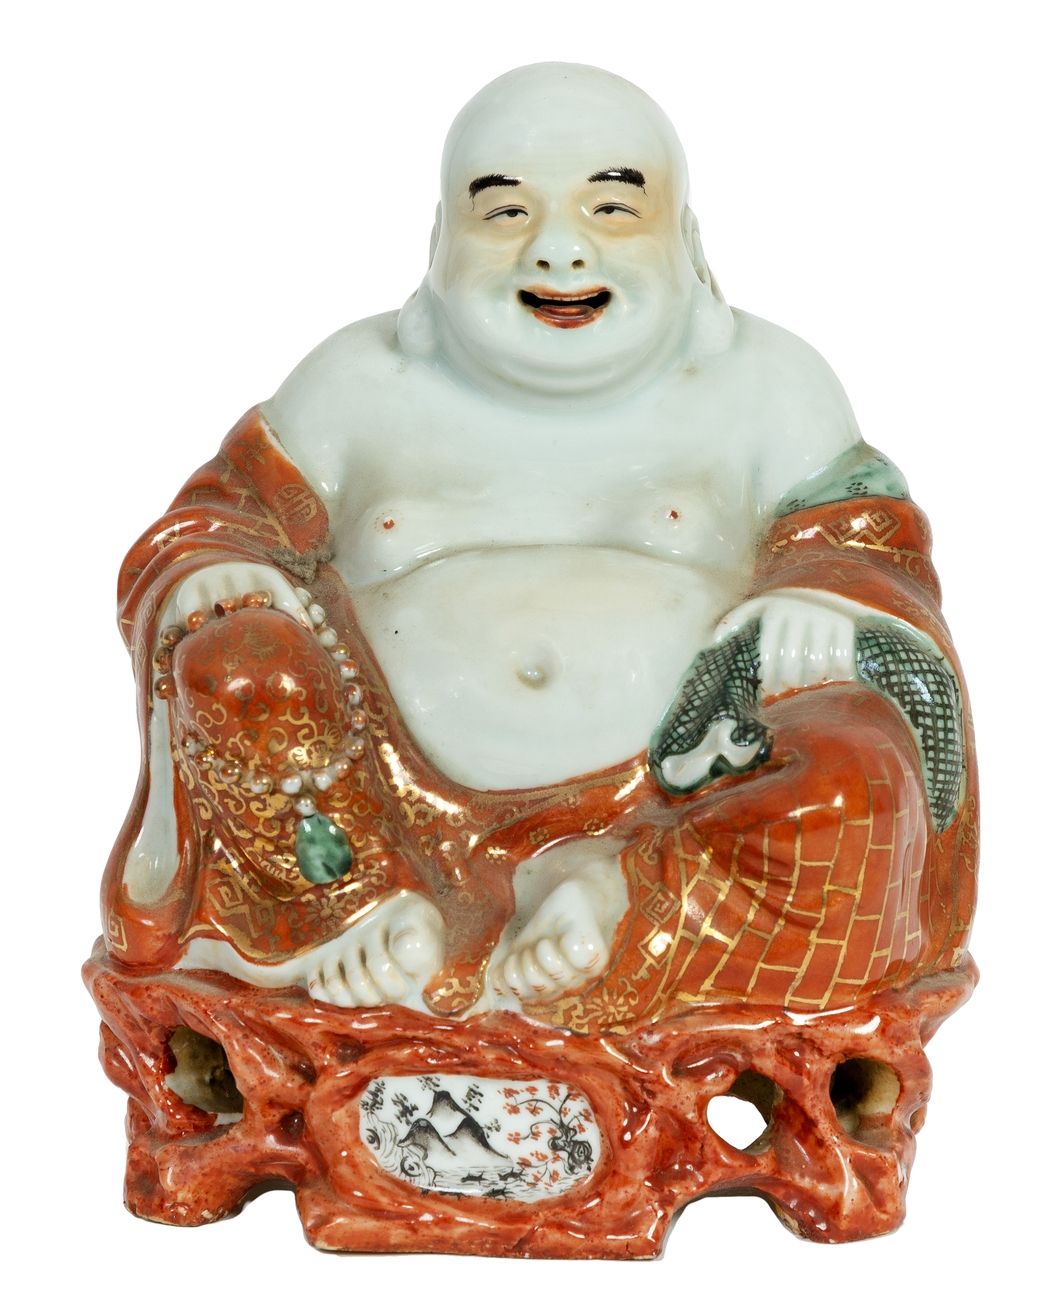 Null China, 19th century
Laughing Buddha in porcelain represented sitting on a r&hellip;